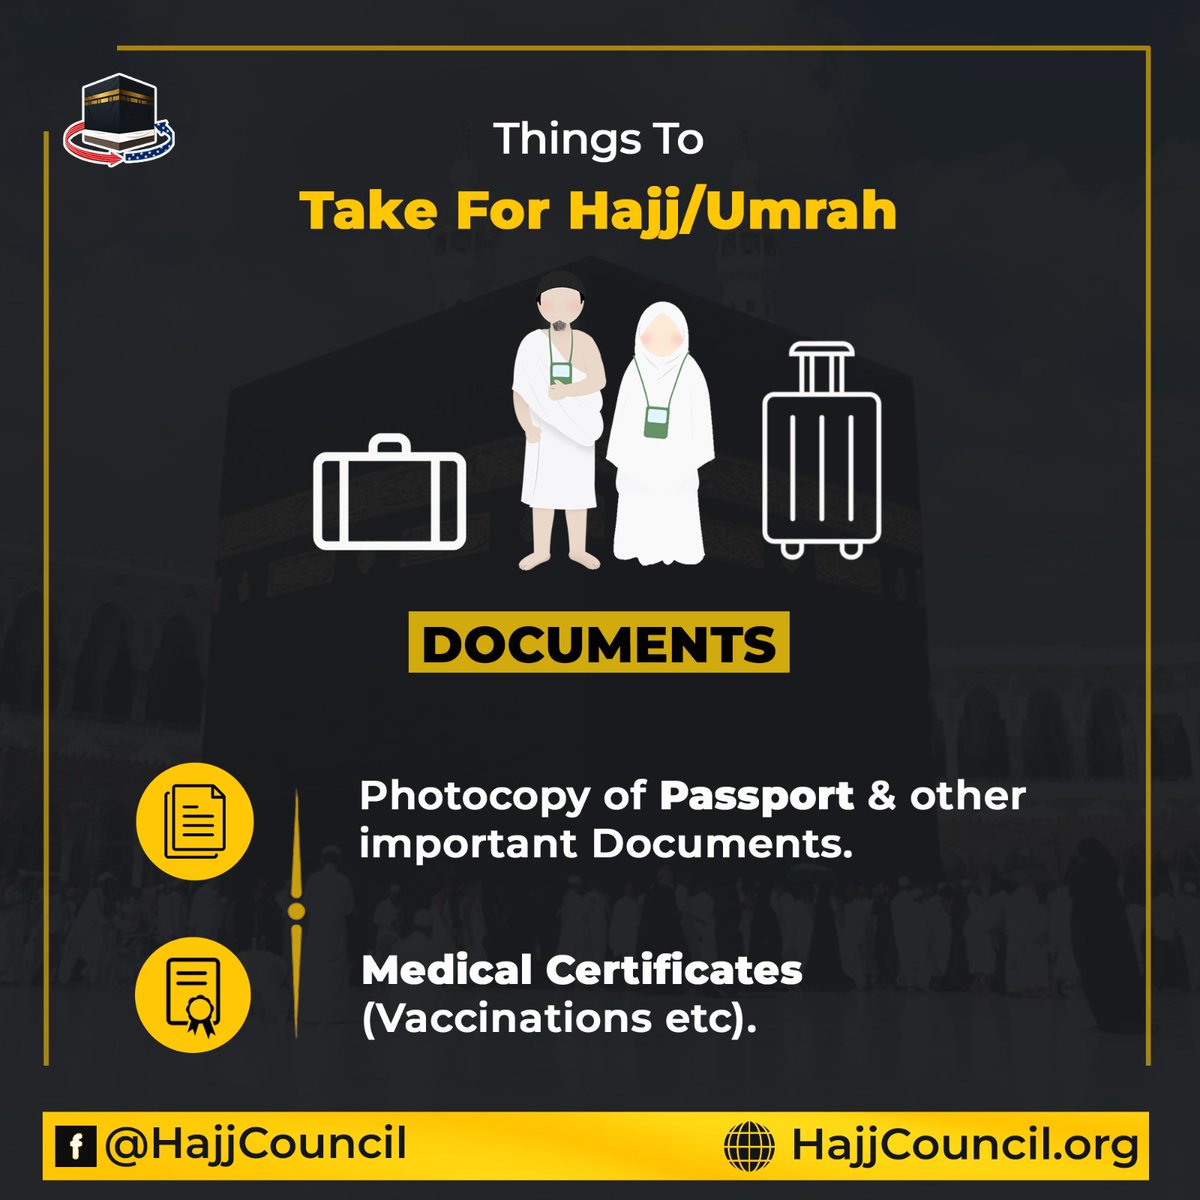 Planning for Hajj or Umrah? Don't forget to carry these essential documents with you. #HajjPreparations #UmrahChecklist #TravelDocuments #IslamicTravel #HajjandUmrah #PilgrimageEssentials #HajjandUmrahTips #PilgrimagePreparations #HajjandUmrahDocument #IslamicJourney #HajjTravel